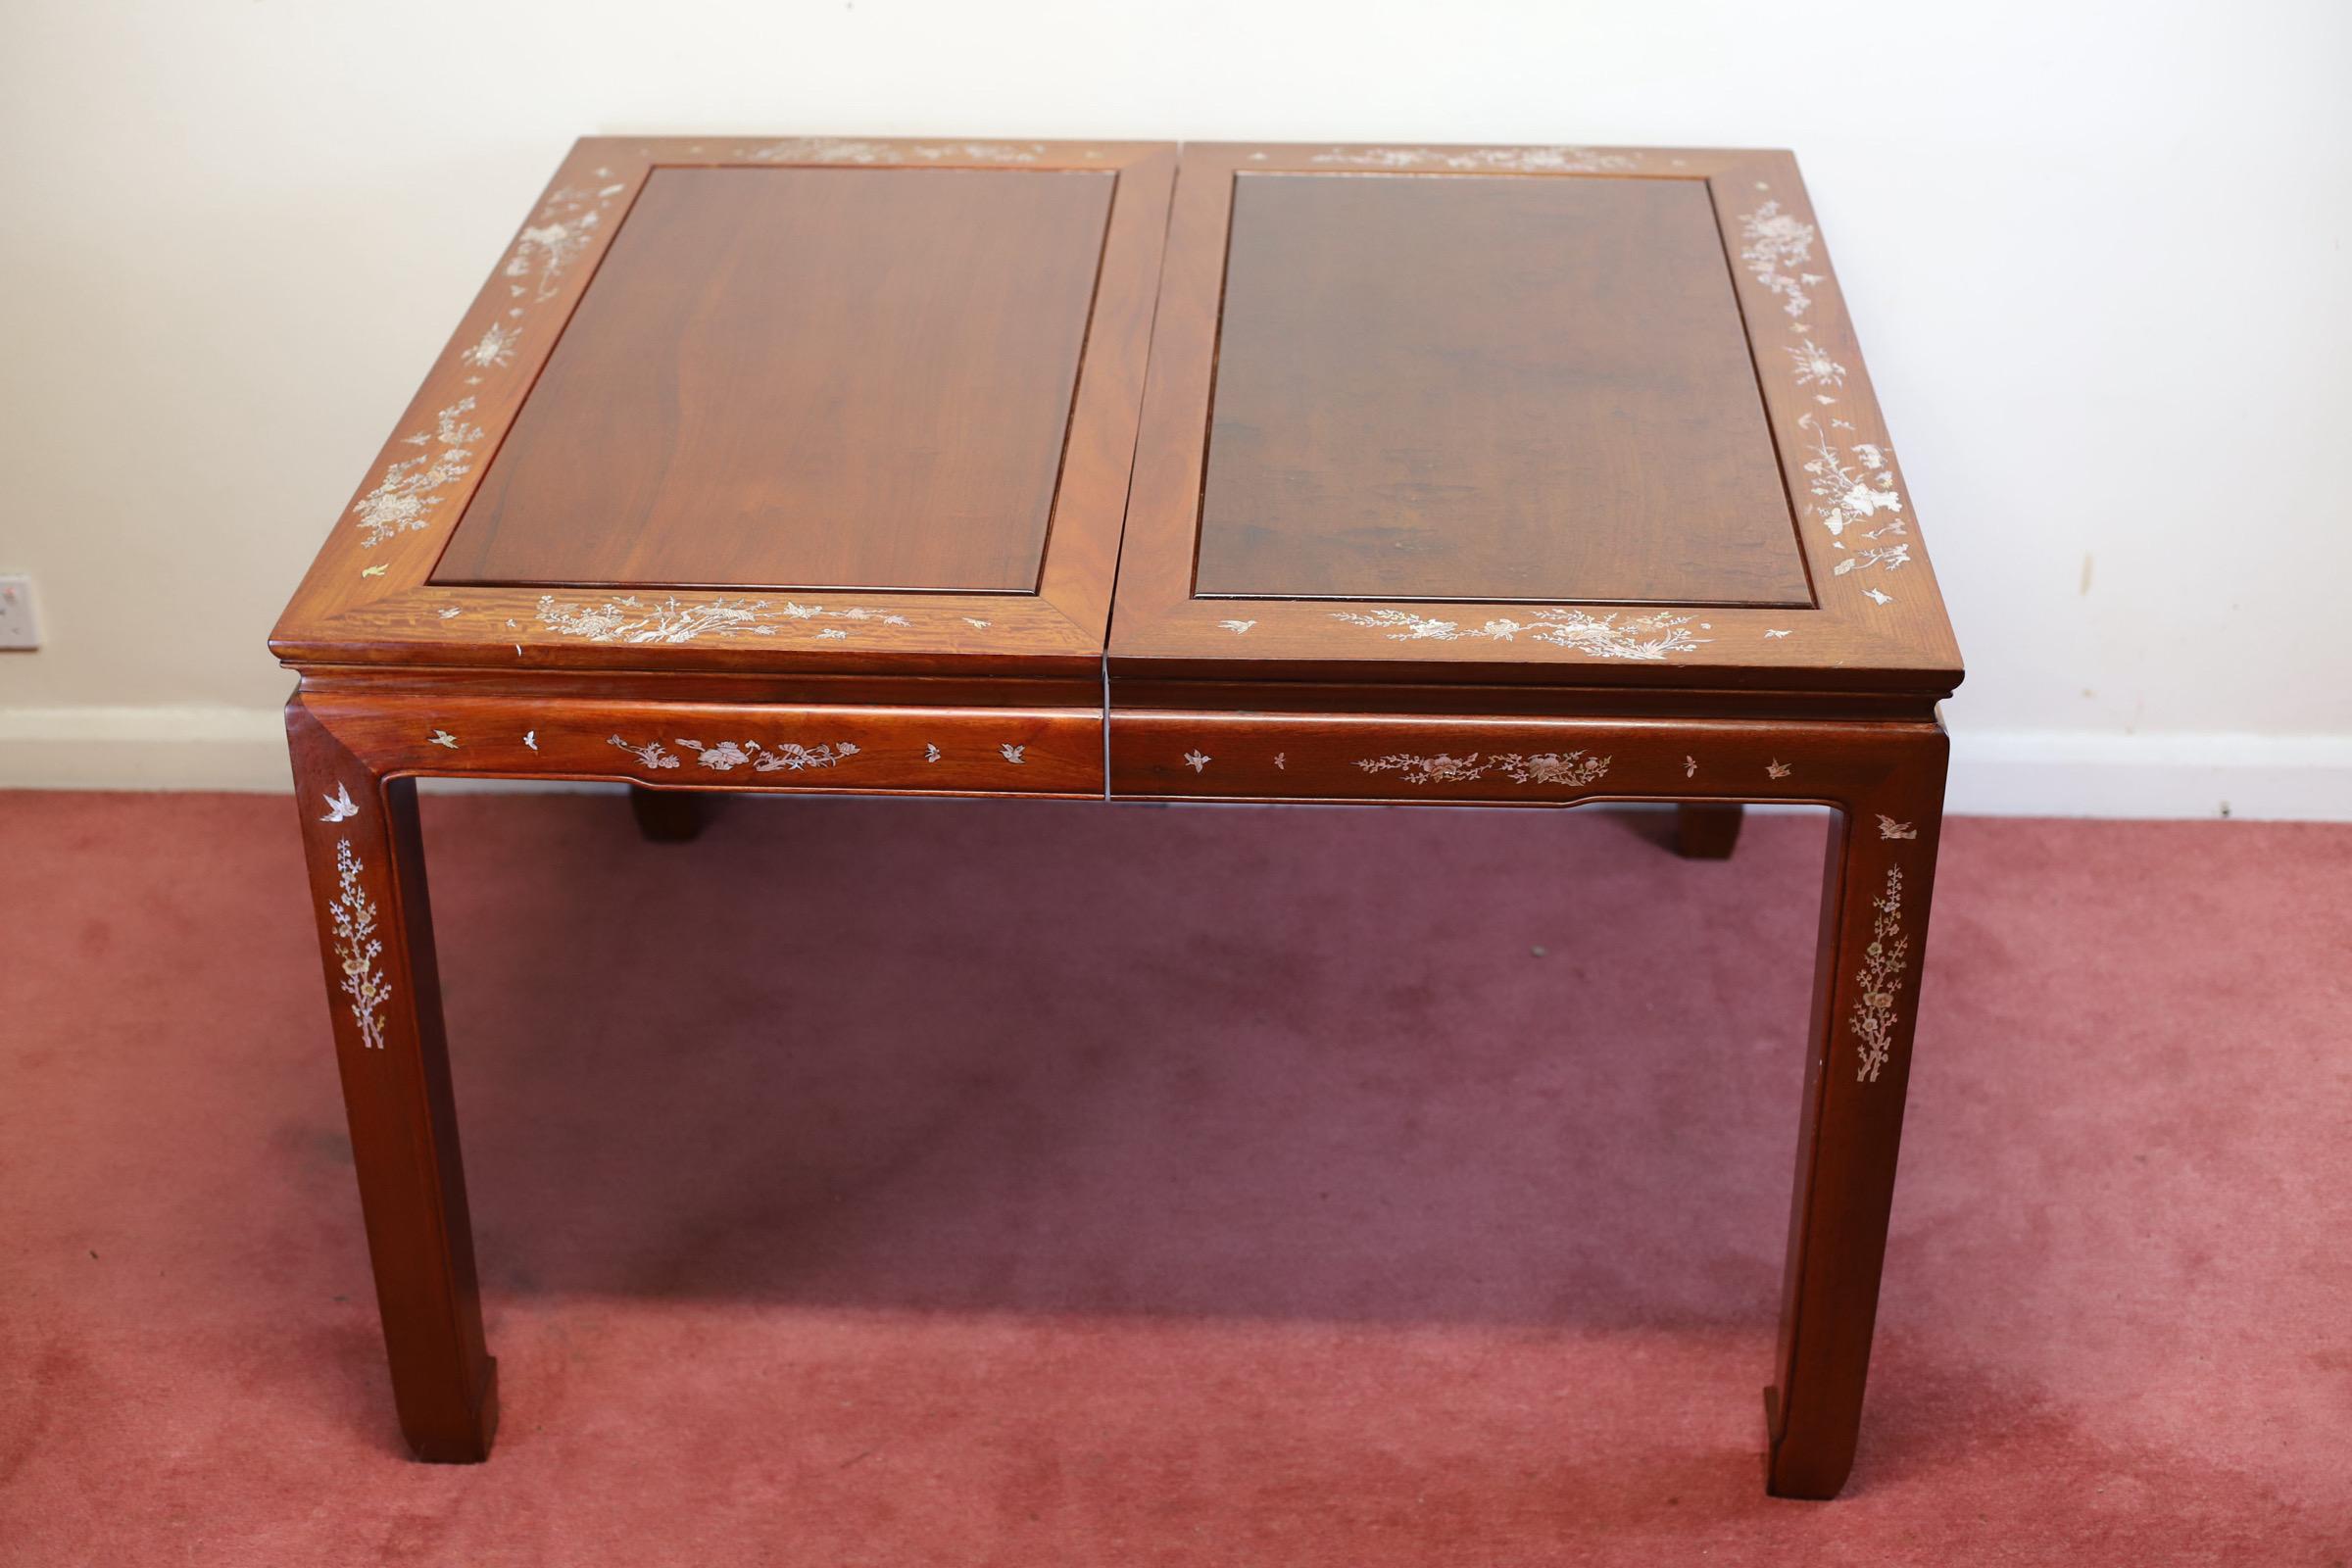 Stunning Asian Hardwood And Mother-of-pearl Inset Dining Table And Eight Chairs In Good Condition For Sale In Crawley, GB